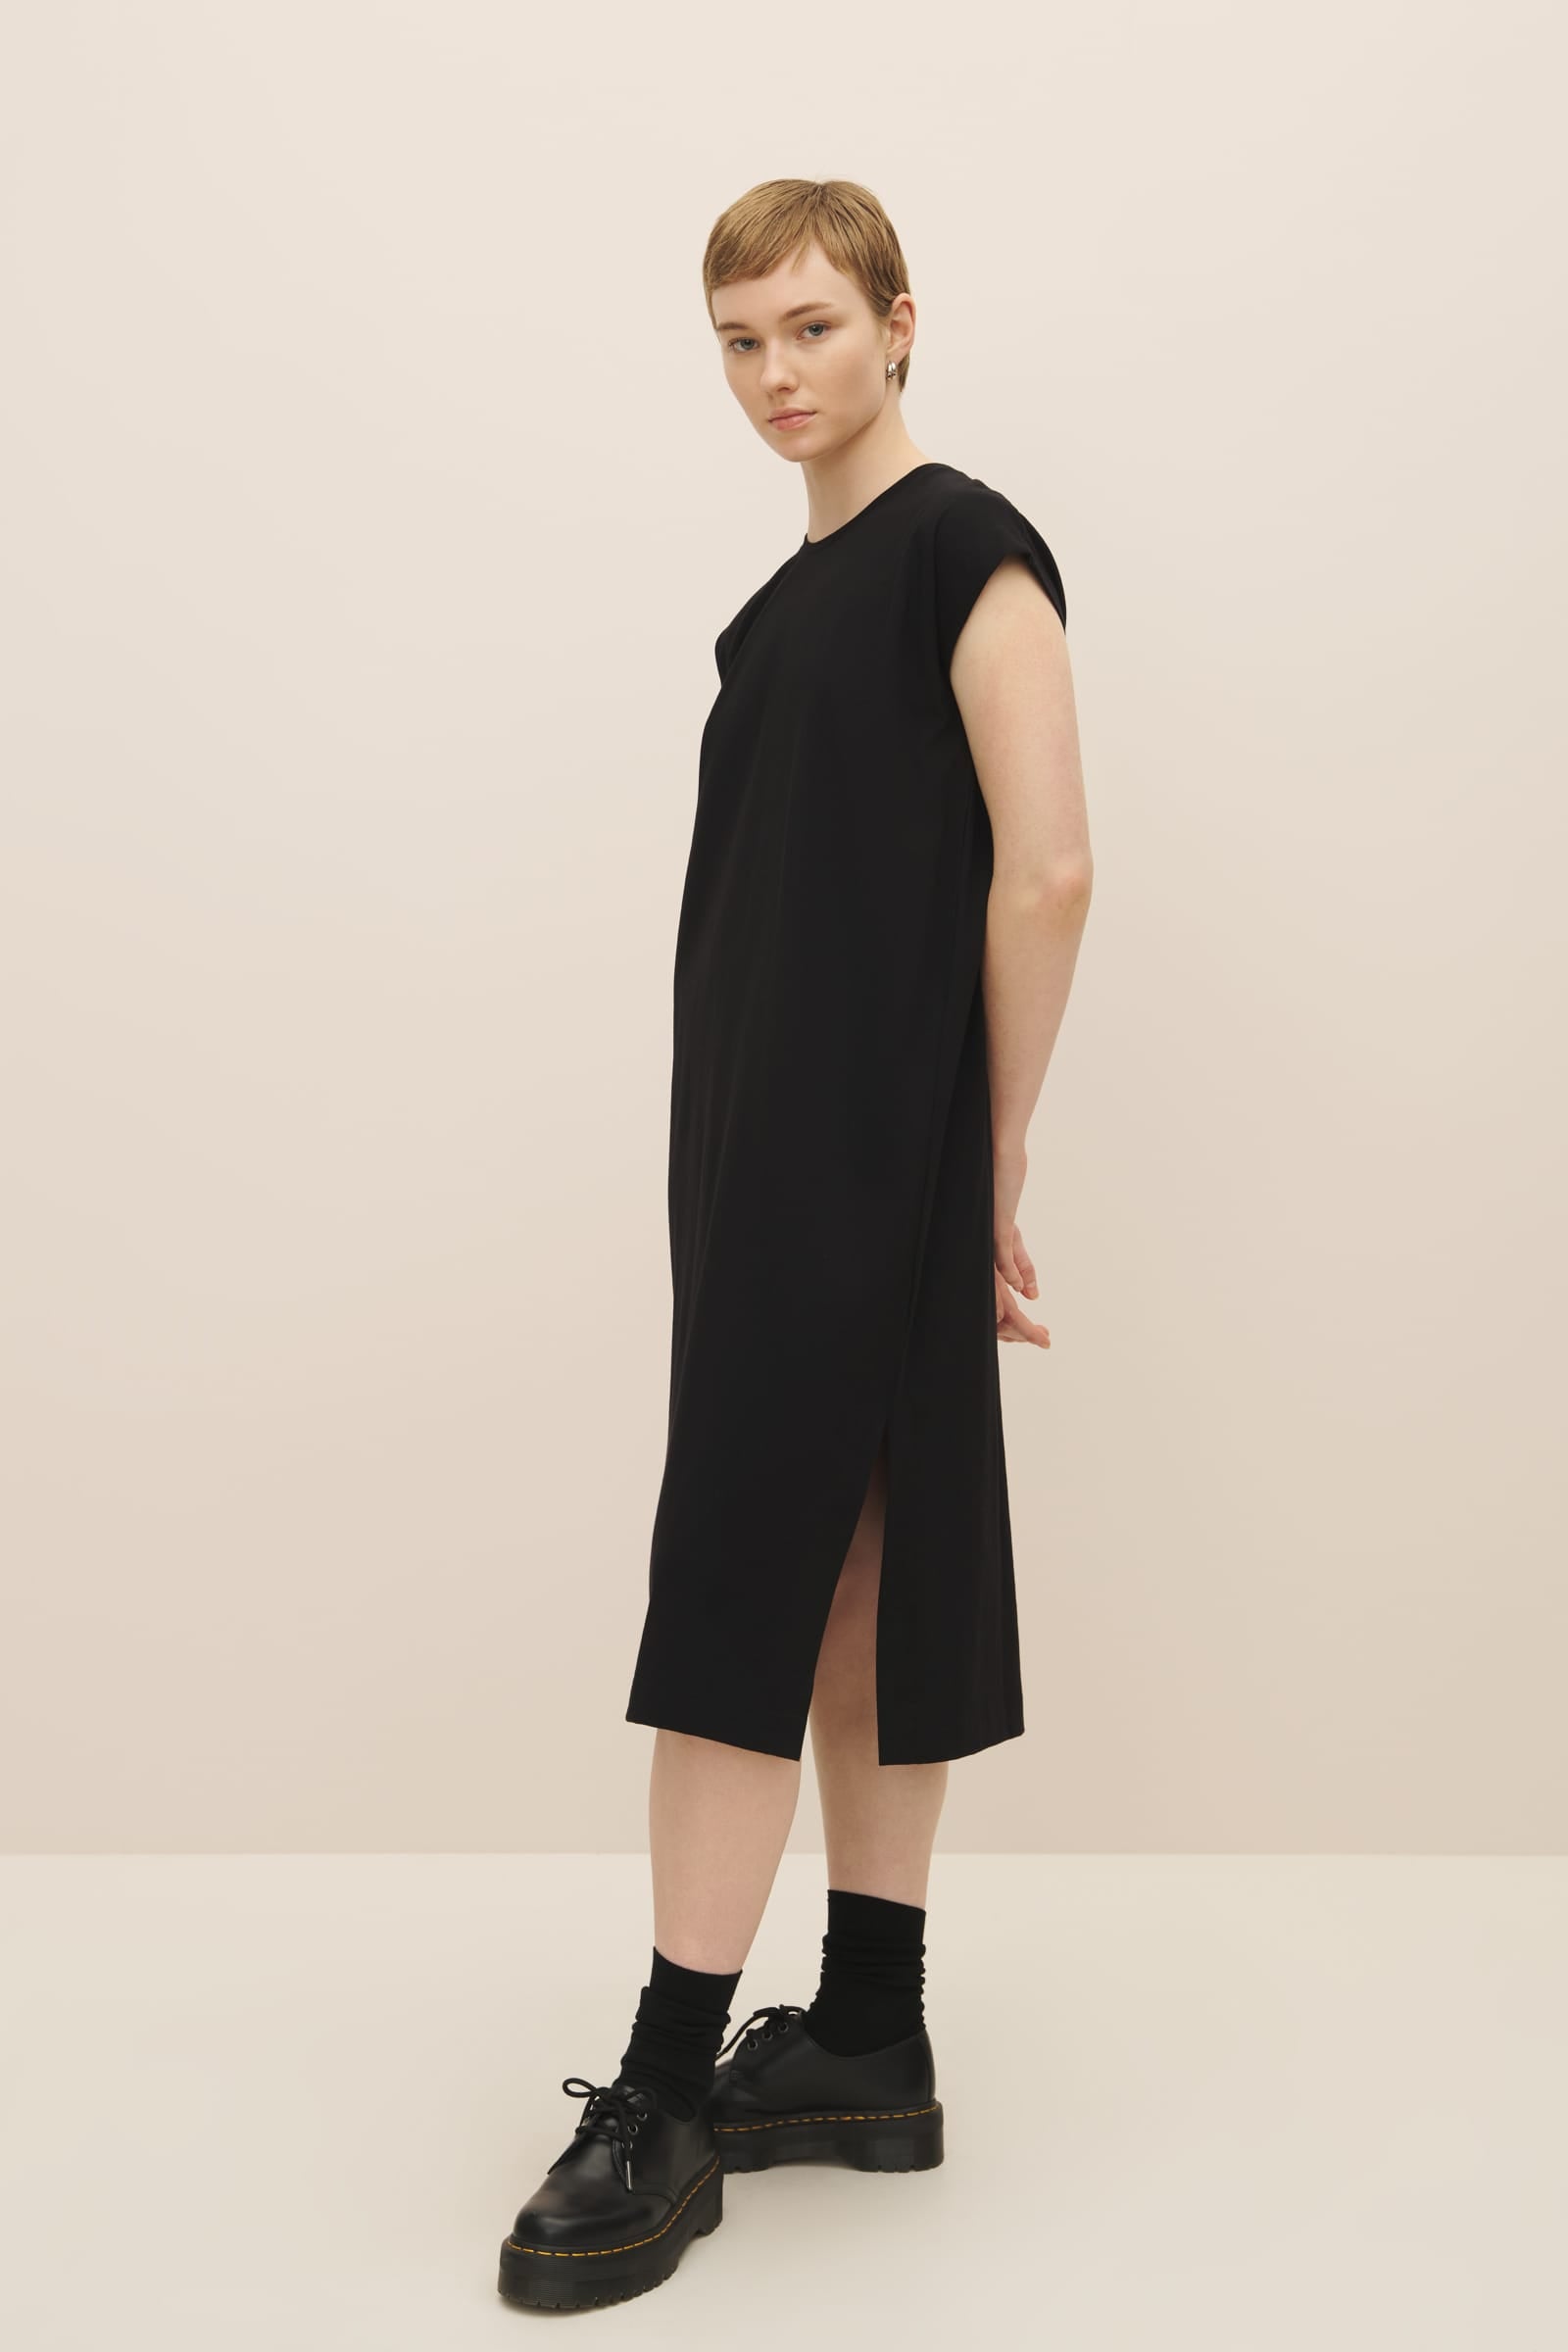 Form Dress - Black | Relaxed Fit | Organic Cotton Jersey | Kowtow